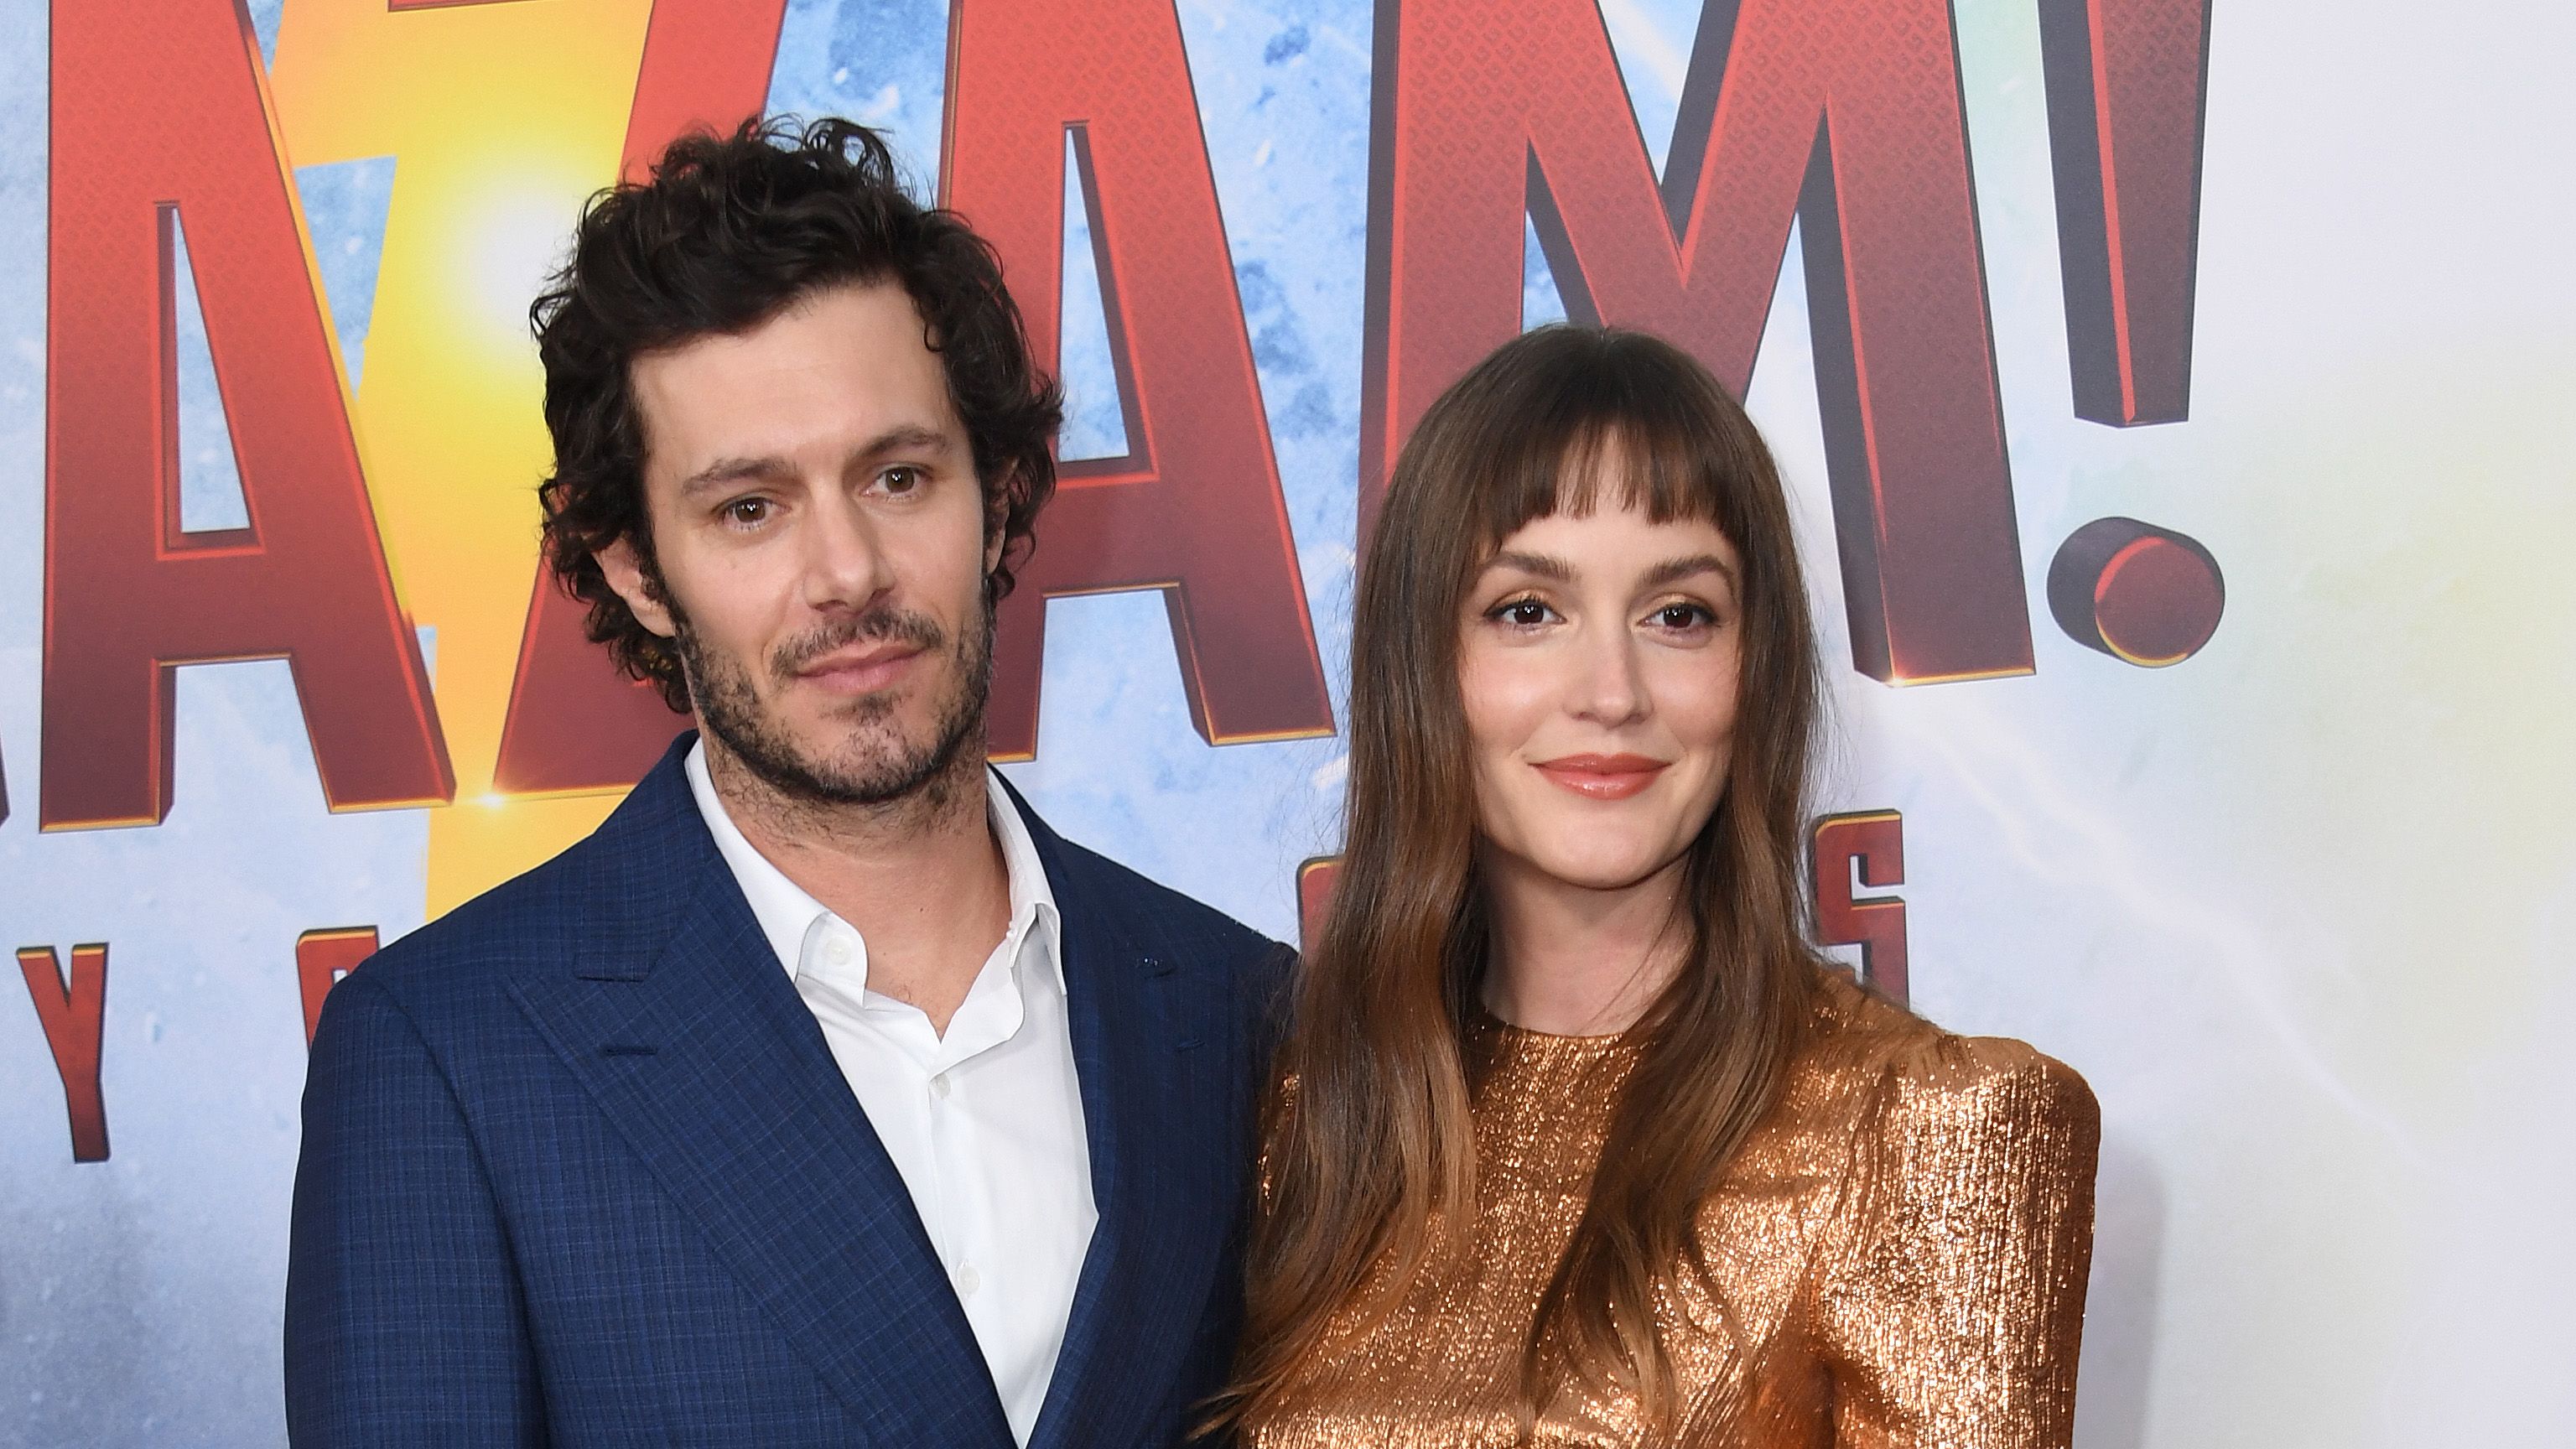 Leighton Meester and Adam Brody Share Rare Details About Their Relationship